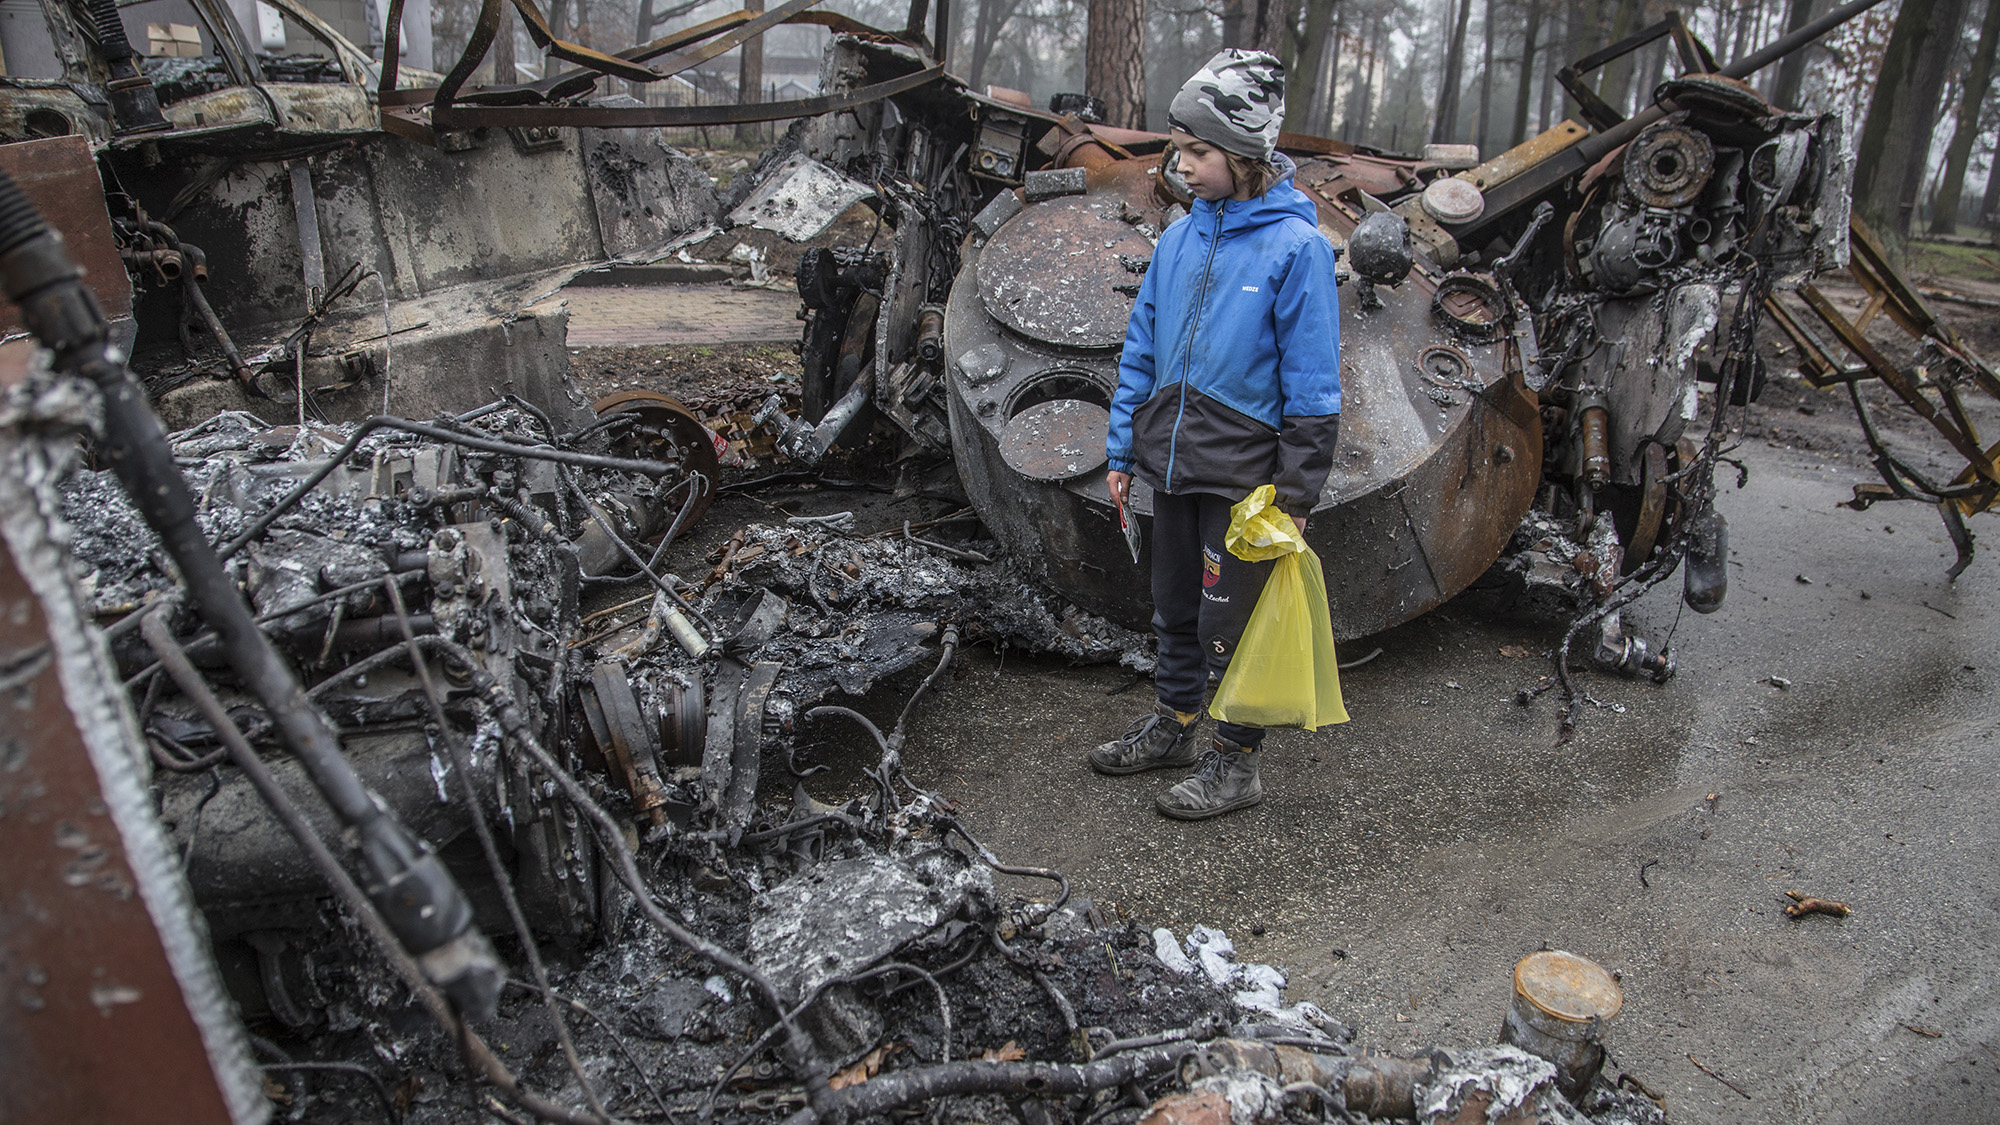 A boy looks at a destroyed Russian tank after recent battles in Bucha, Ukraine on Friday, Apr. 1.